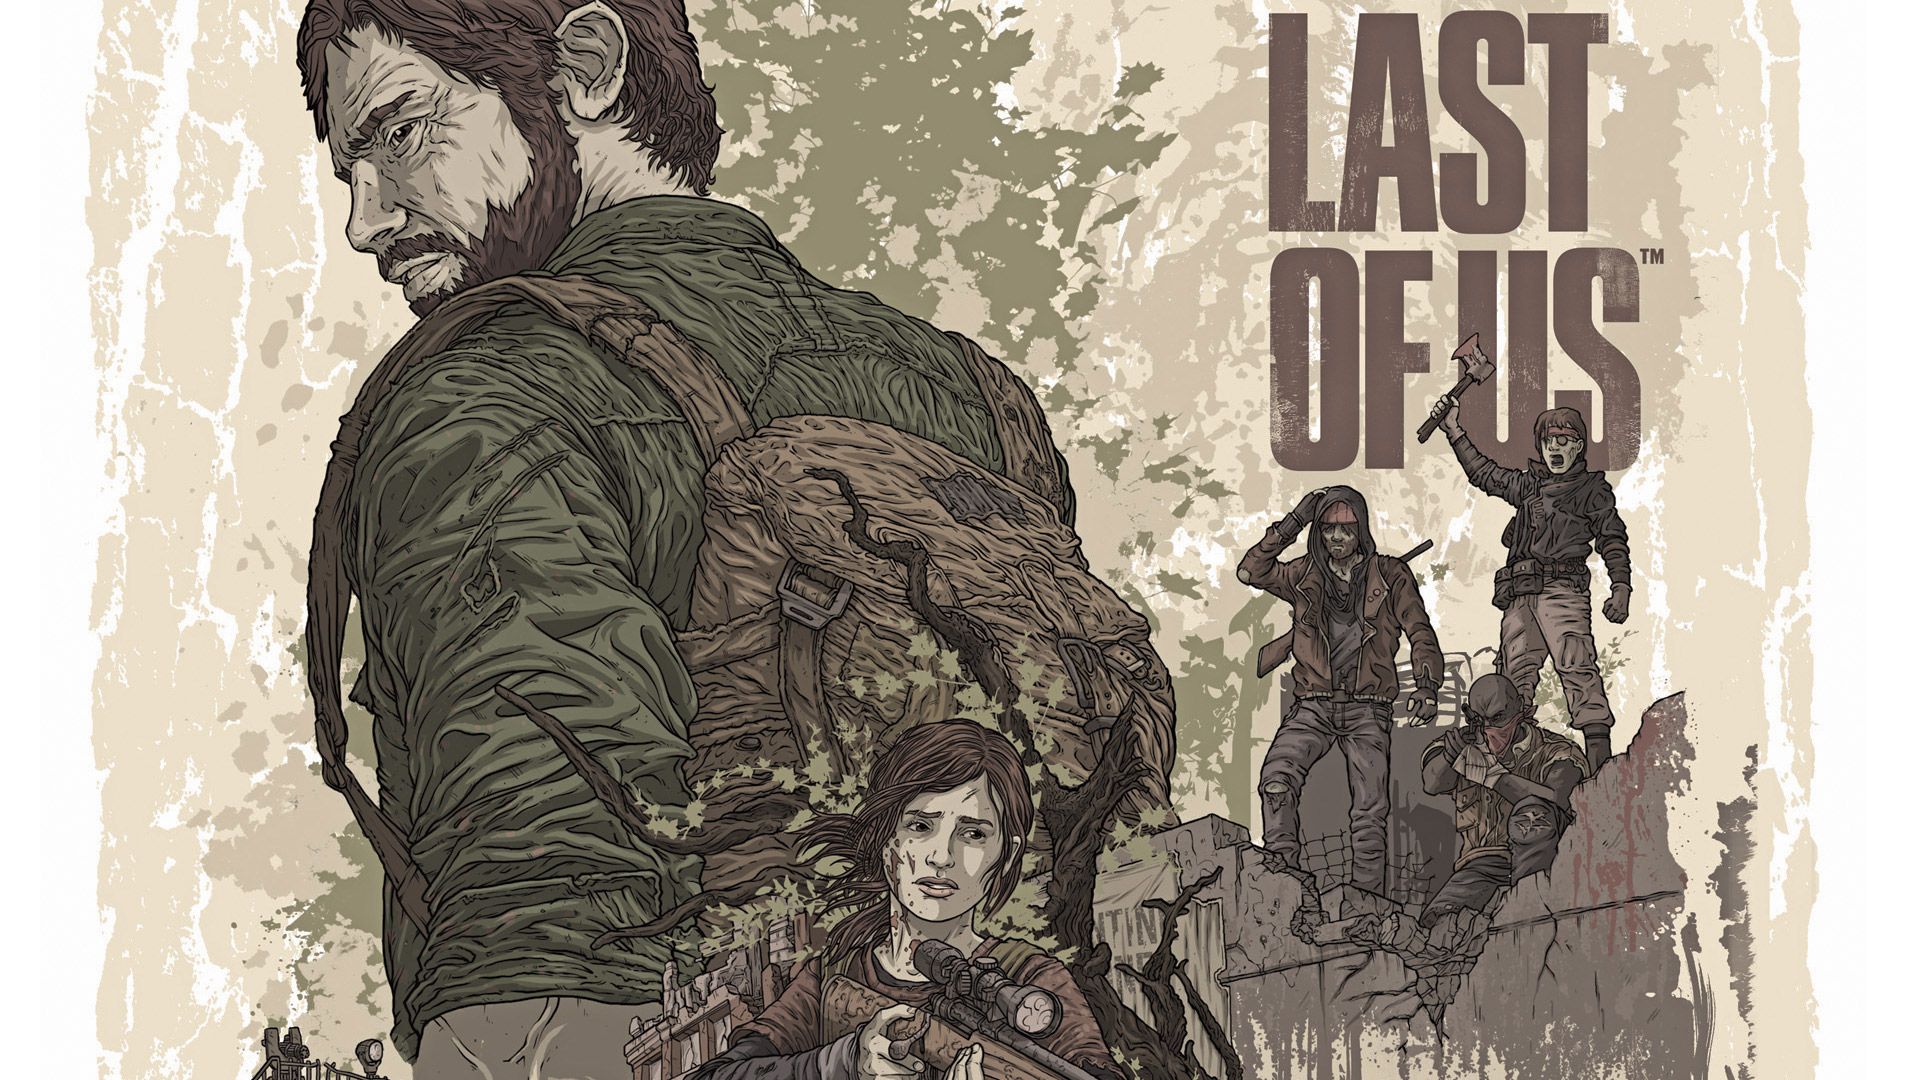 Зе ласт ру. The last of us 1. Одни из нас (the last of us) ps4. The last of us 2013 Постер.